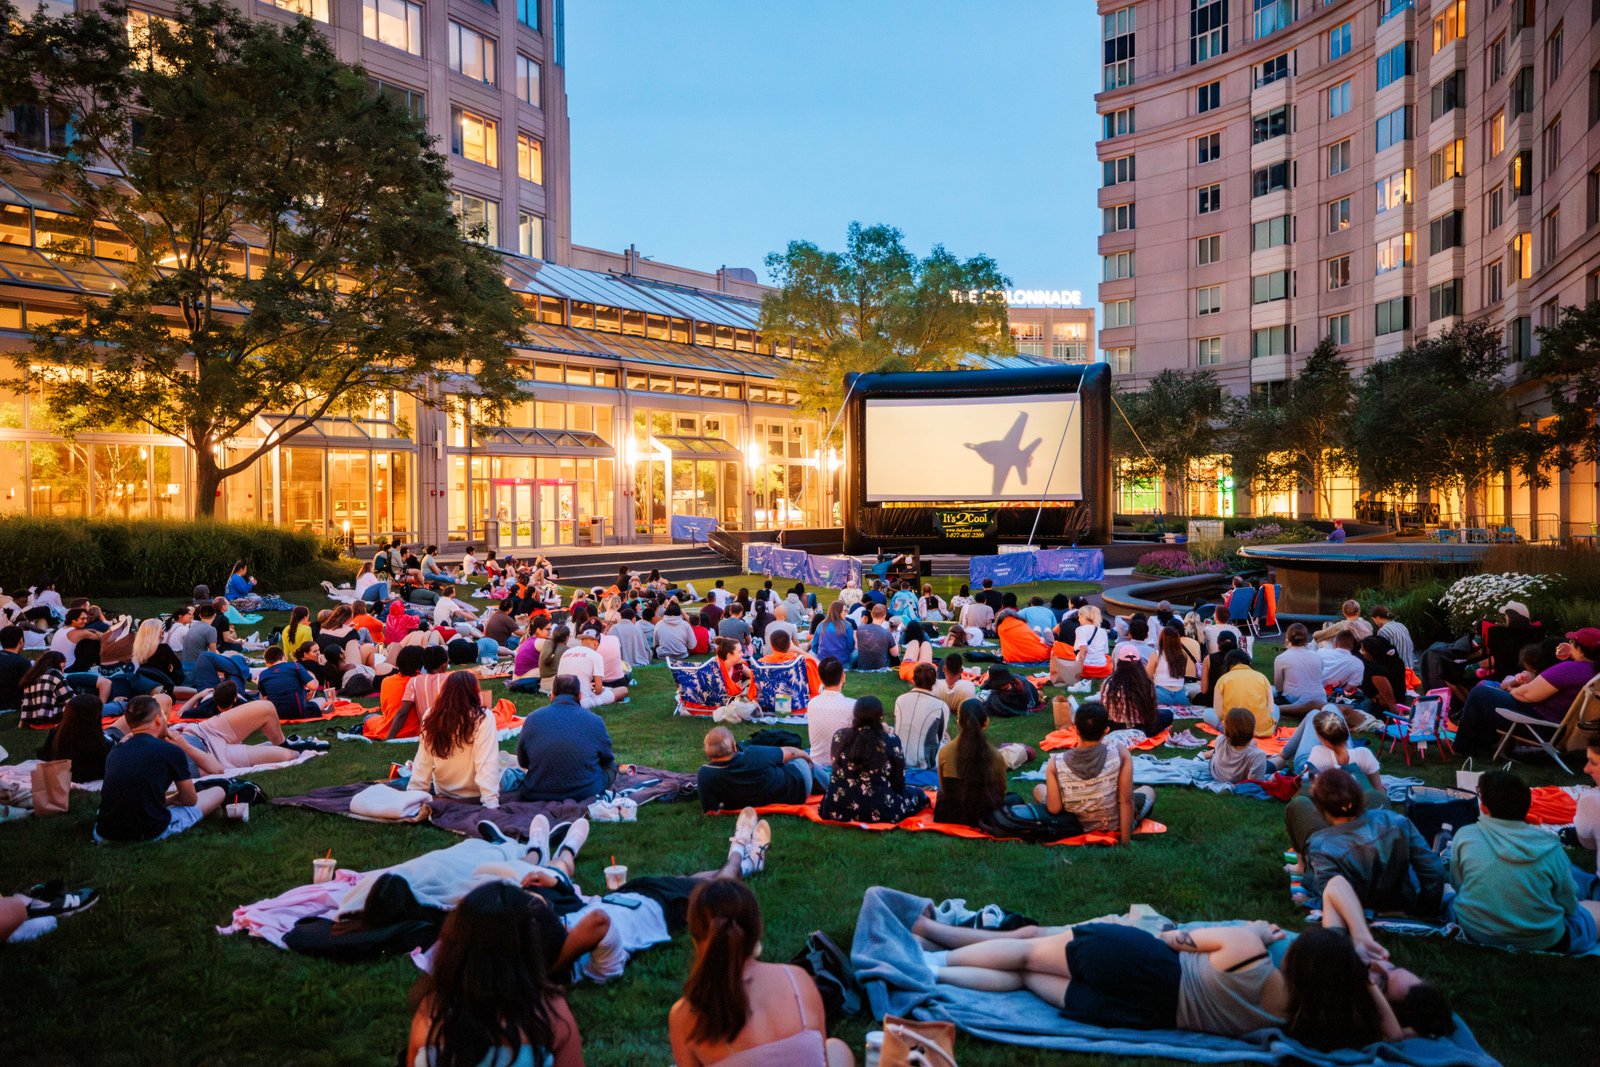 Summer Flicks at the Prudential Center - The Princess and the Frog